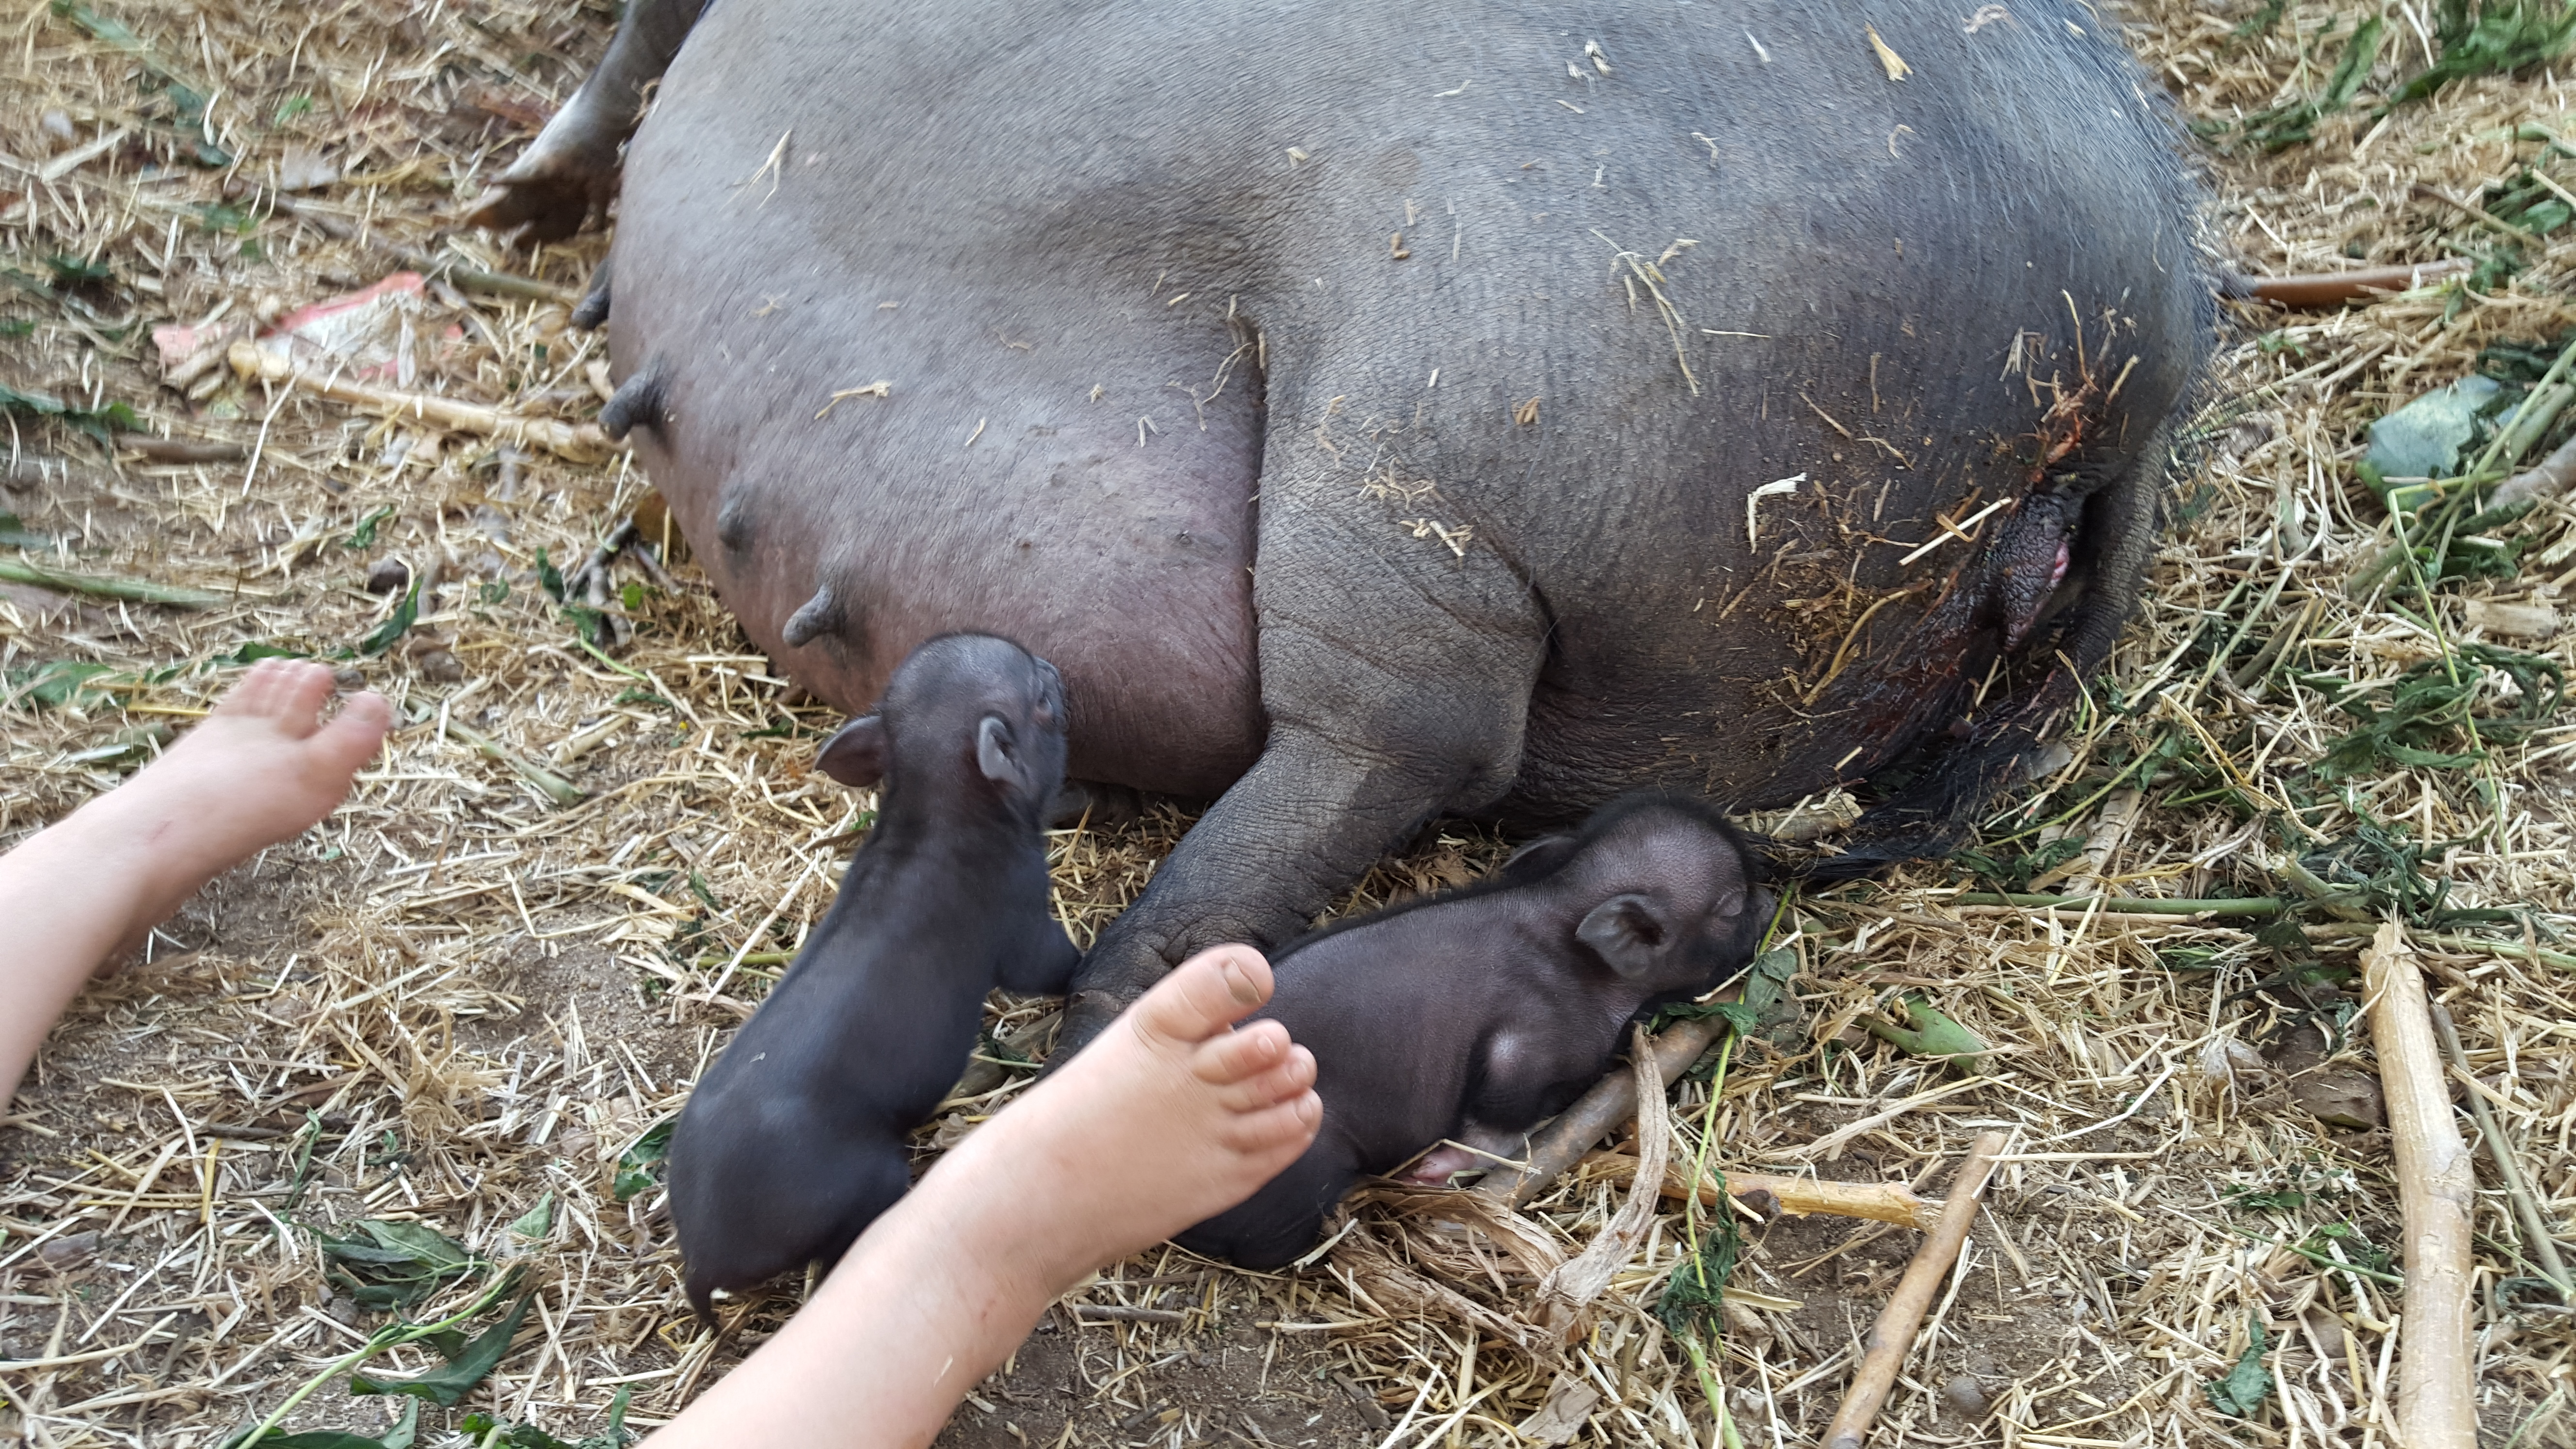 Our Ranch's pot belly started ddelivering her piglets around 4p.m. on June 27 2015.